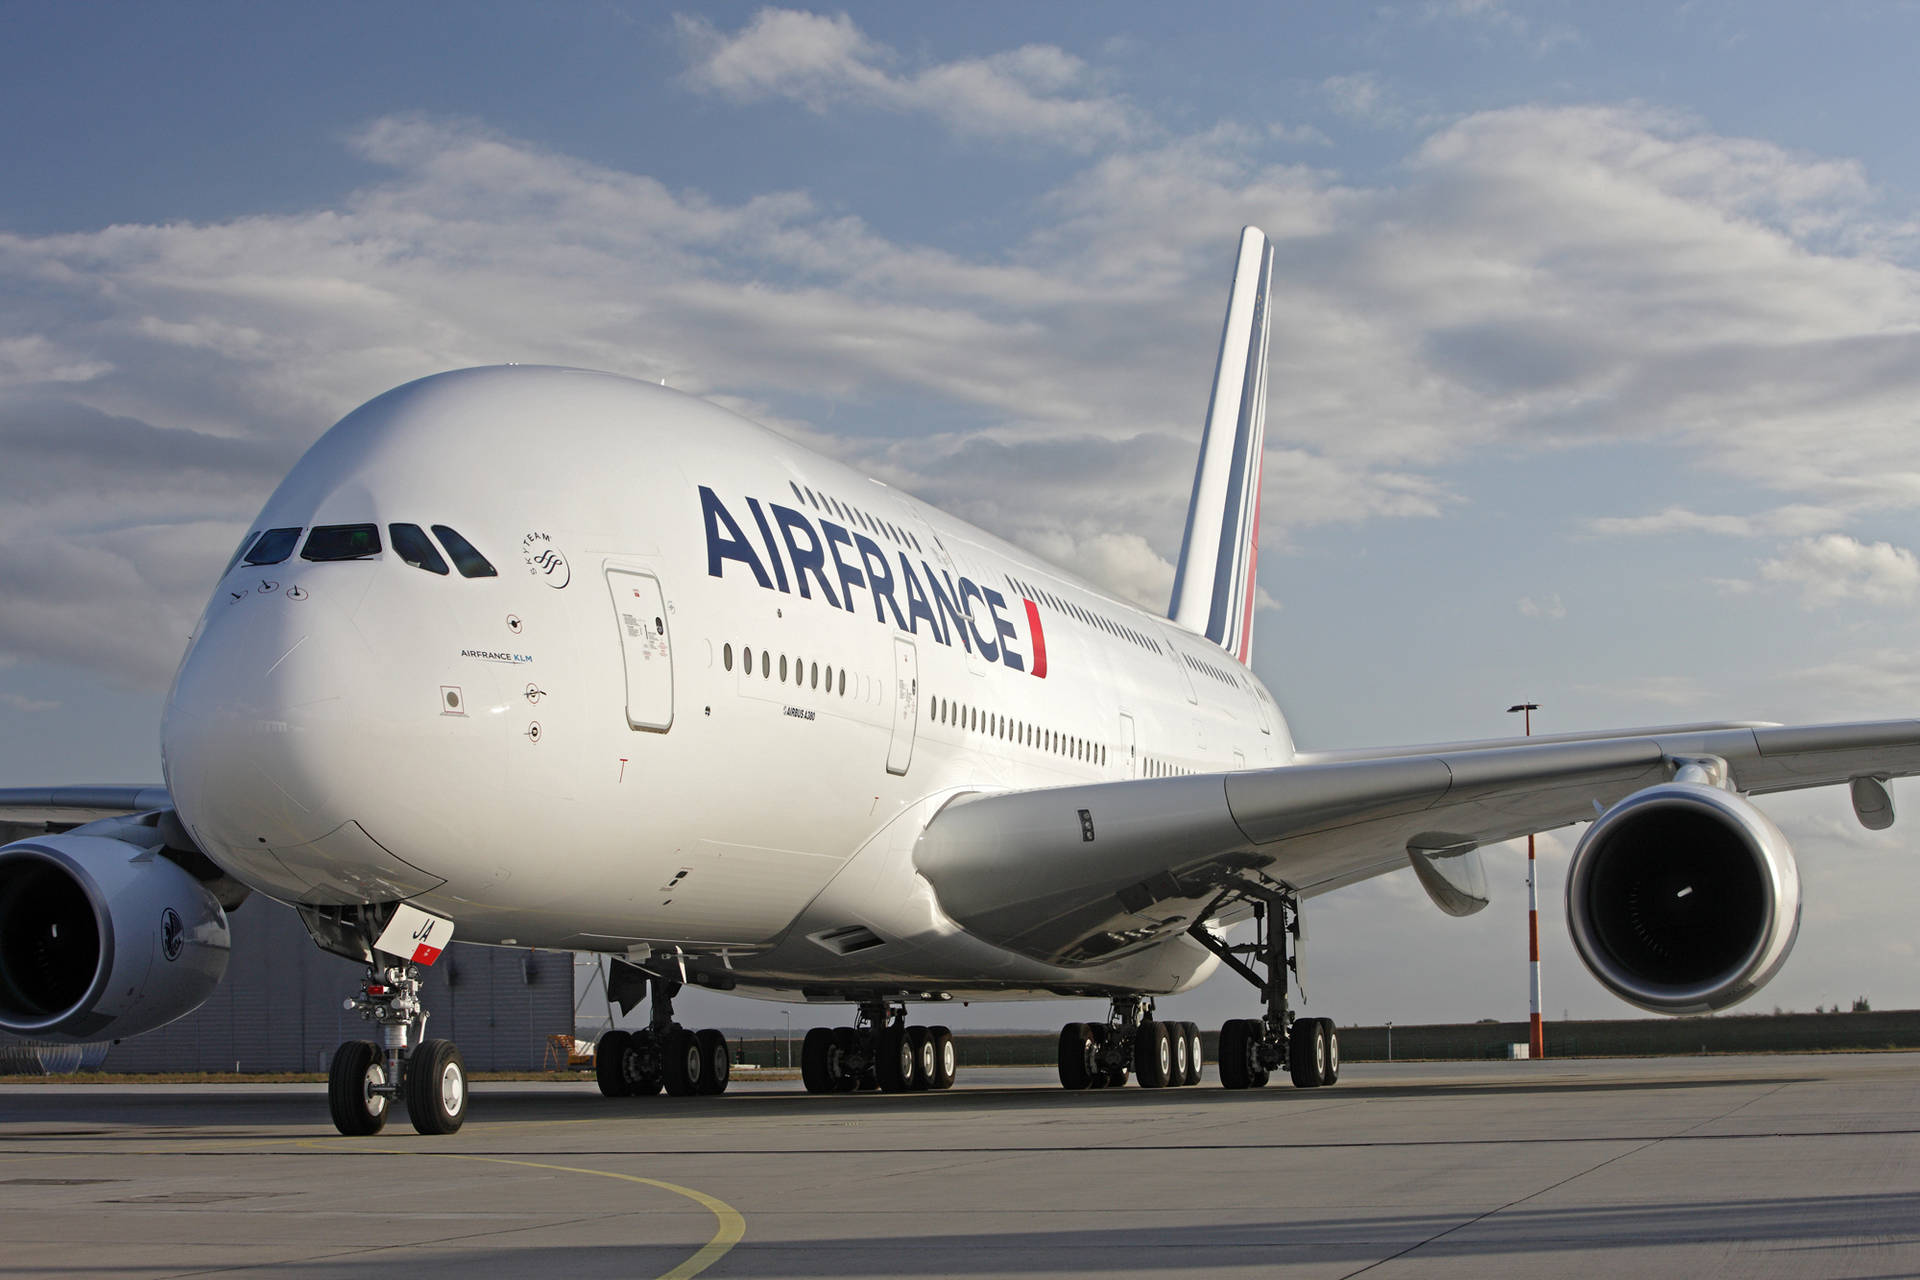 Air France Airbus A380 Plane At The Airport Wallpaper